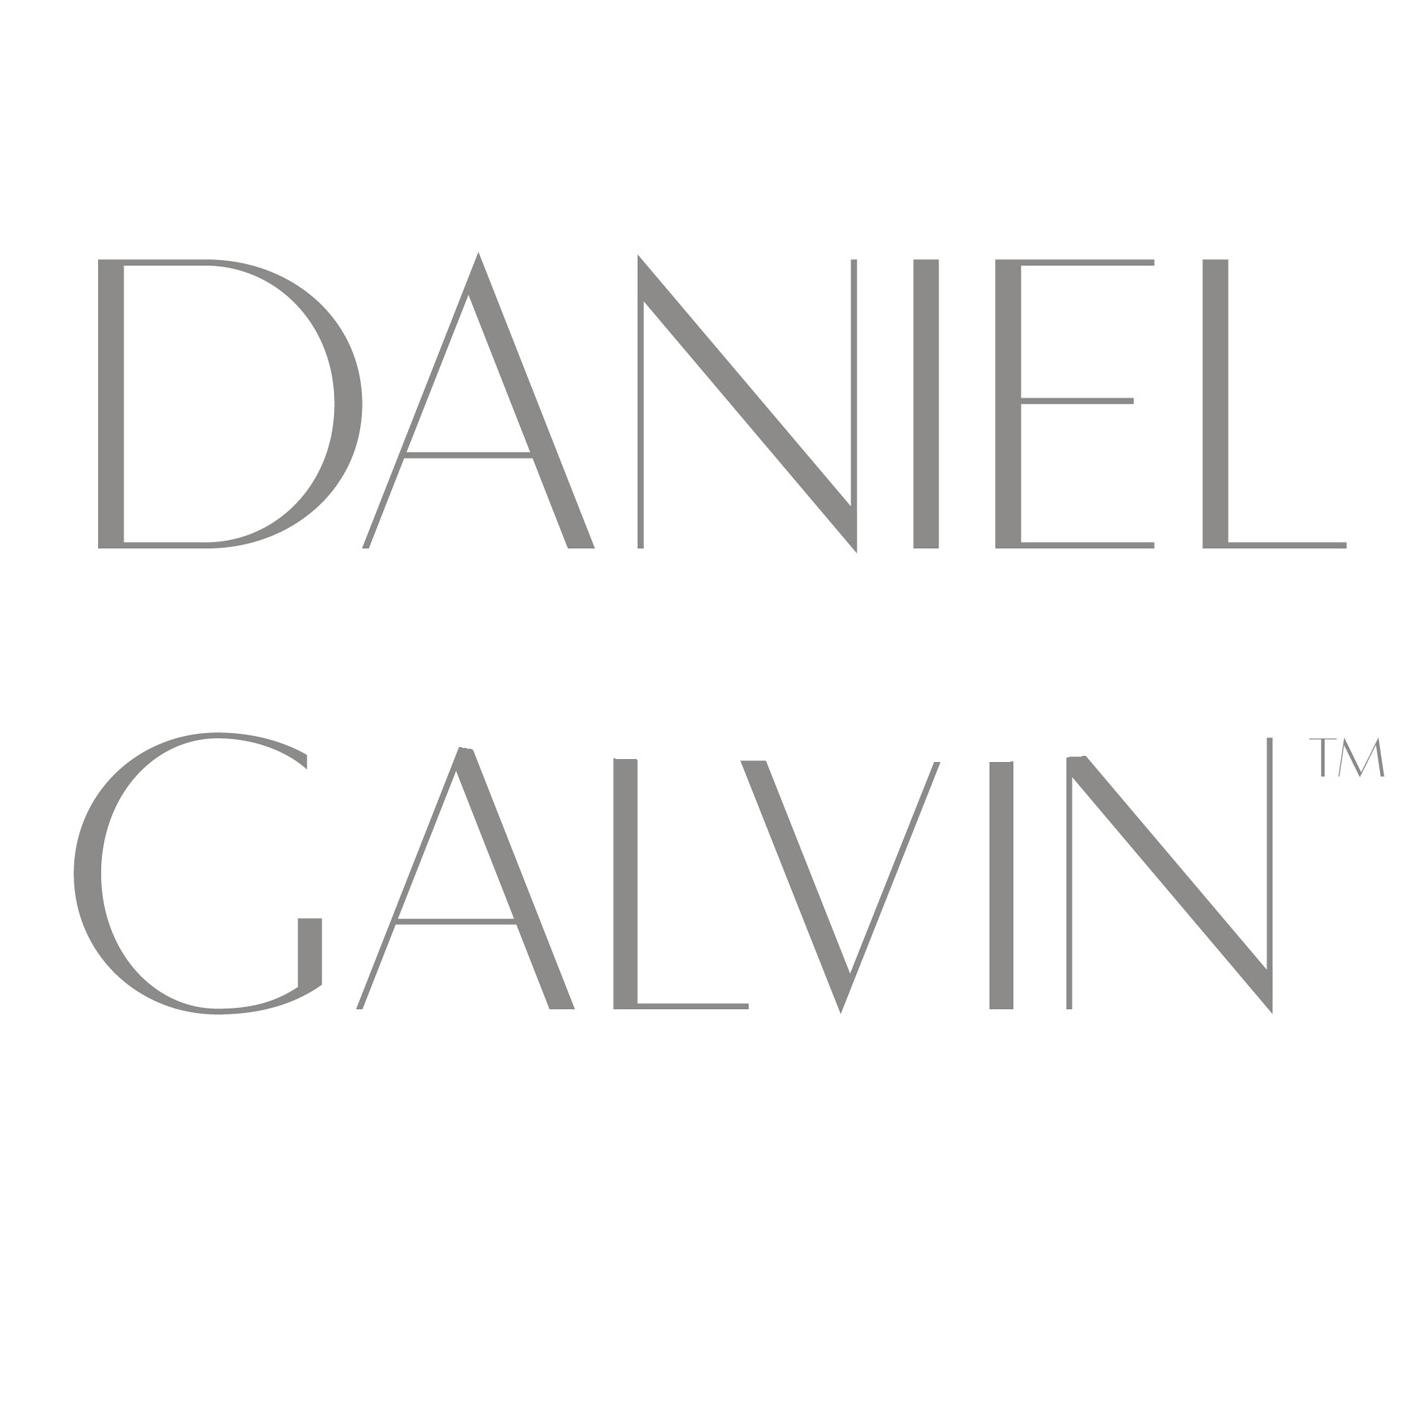 The Daniel Galvin salons offer world class colour and styling services. Our flagship salon is located in London’s West End with our newest salon in Kensington.